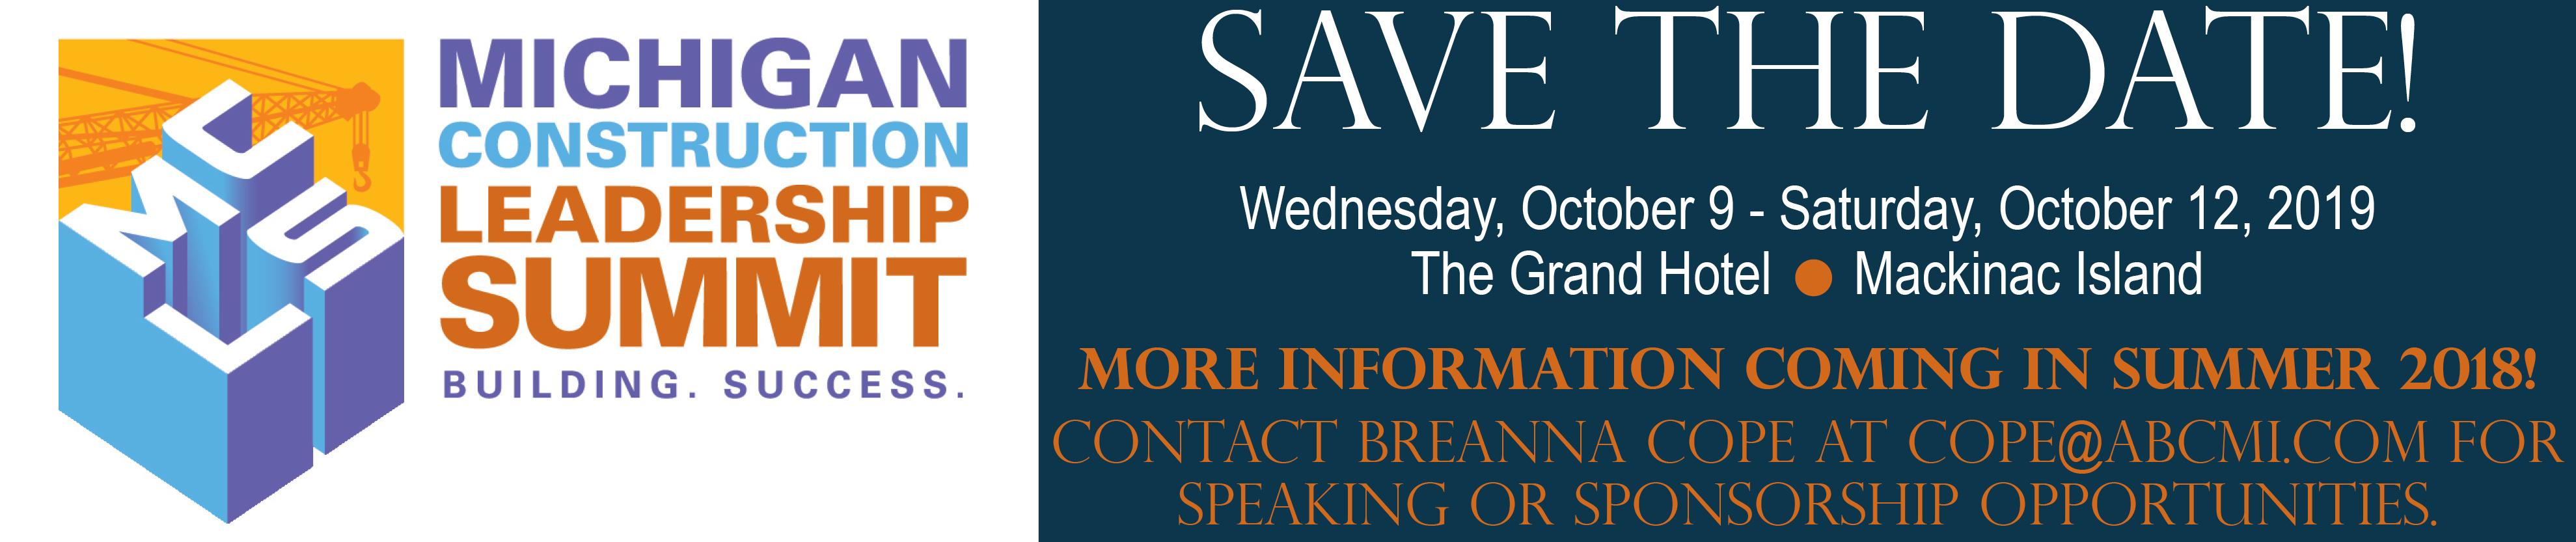 save the date banner 19